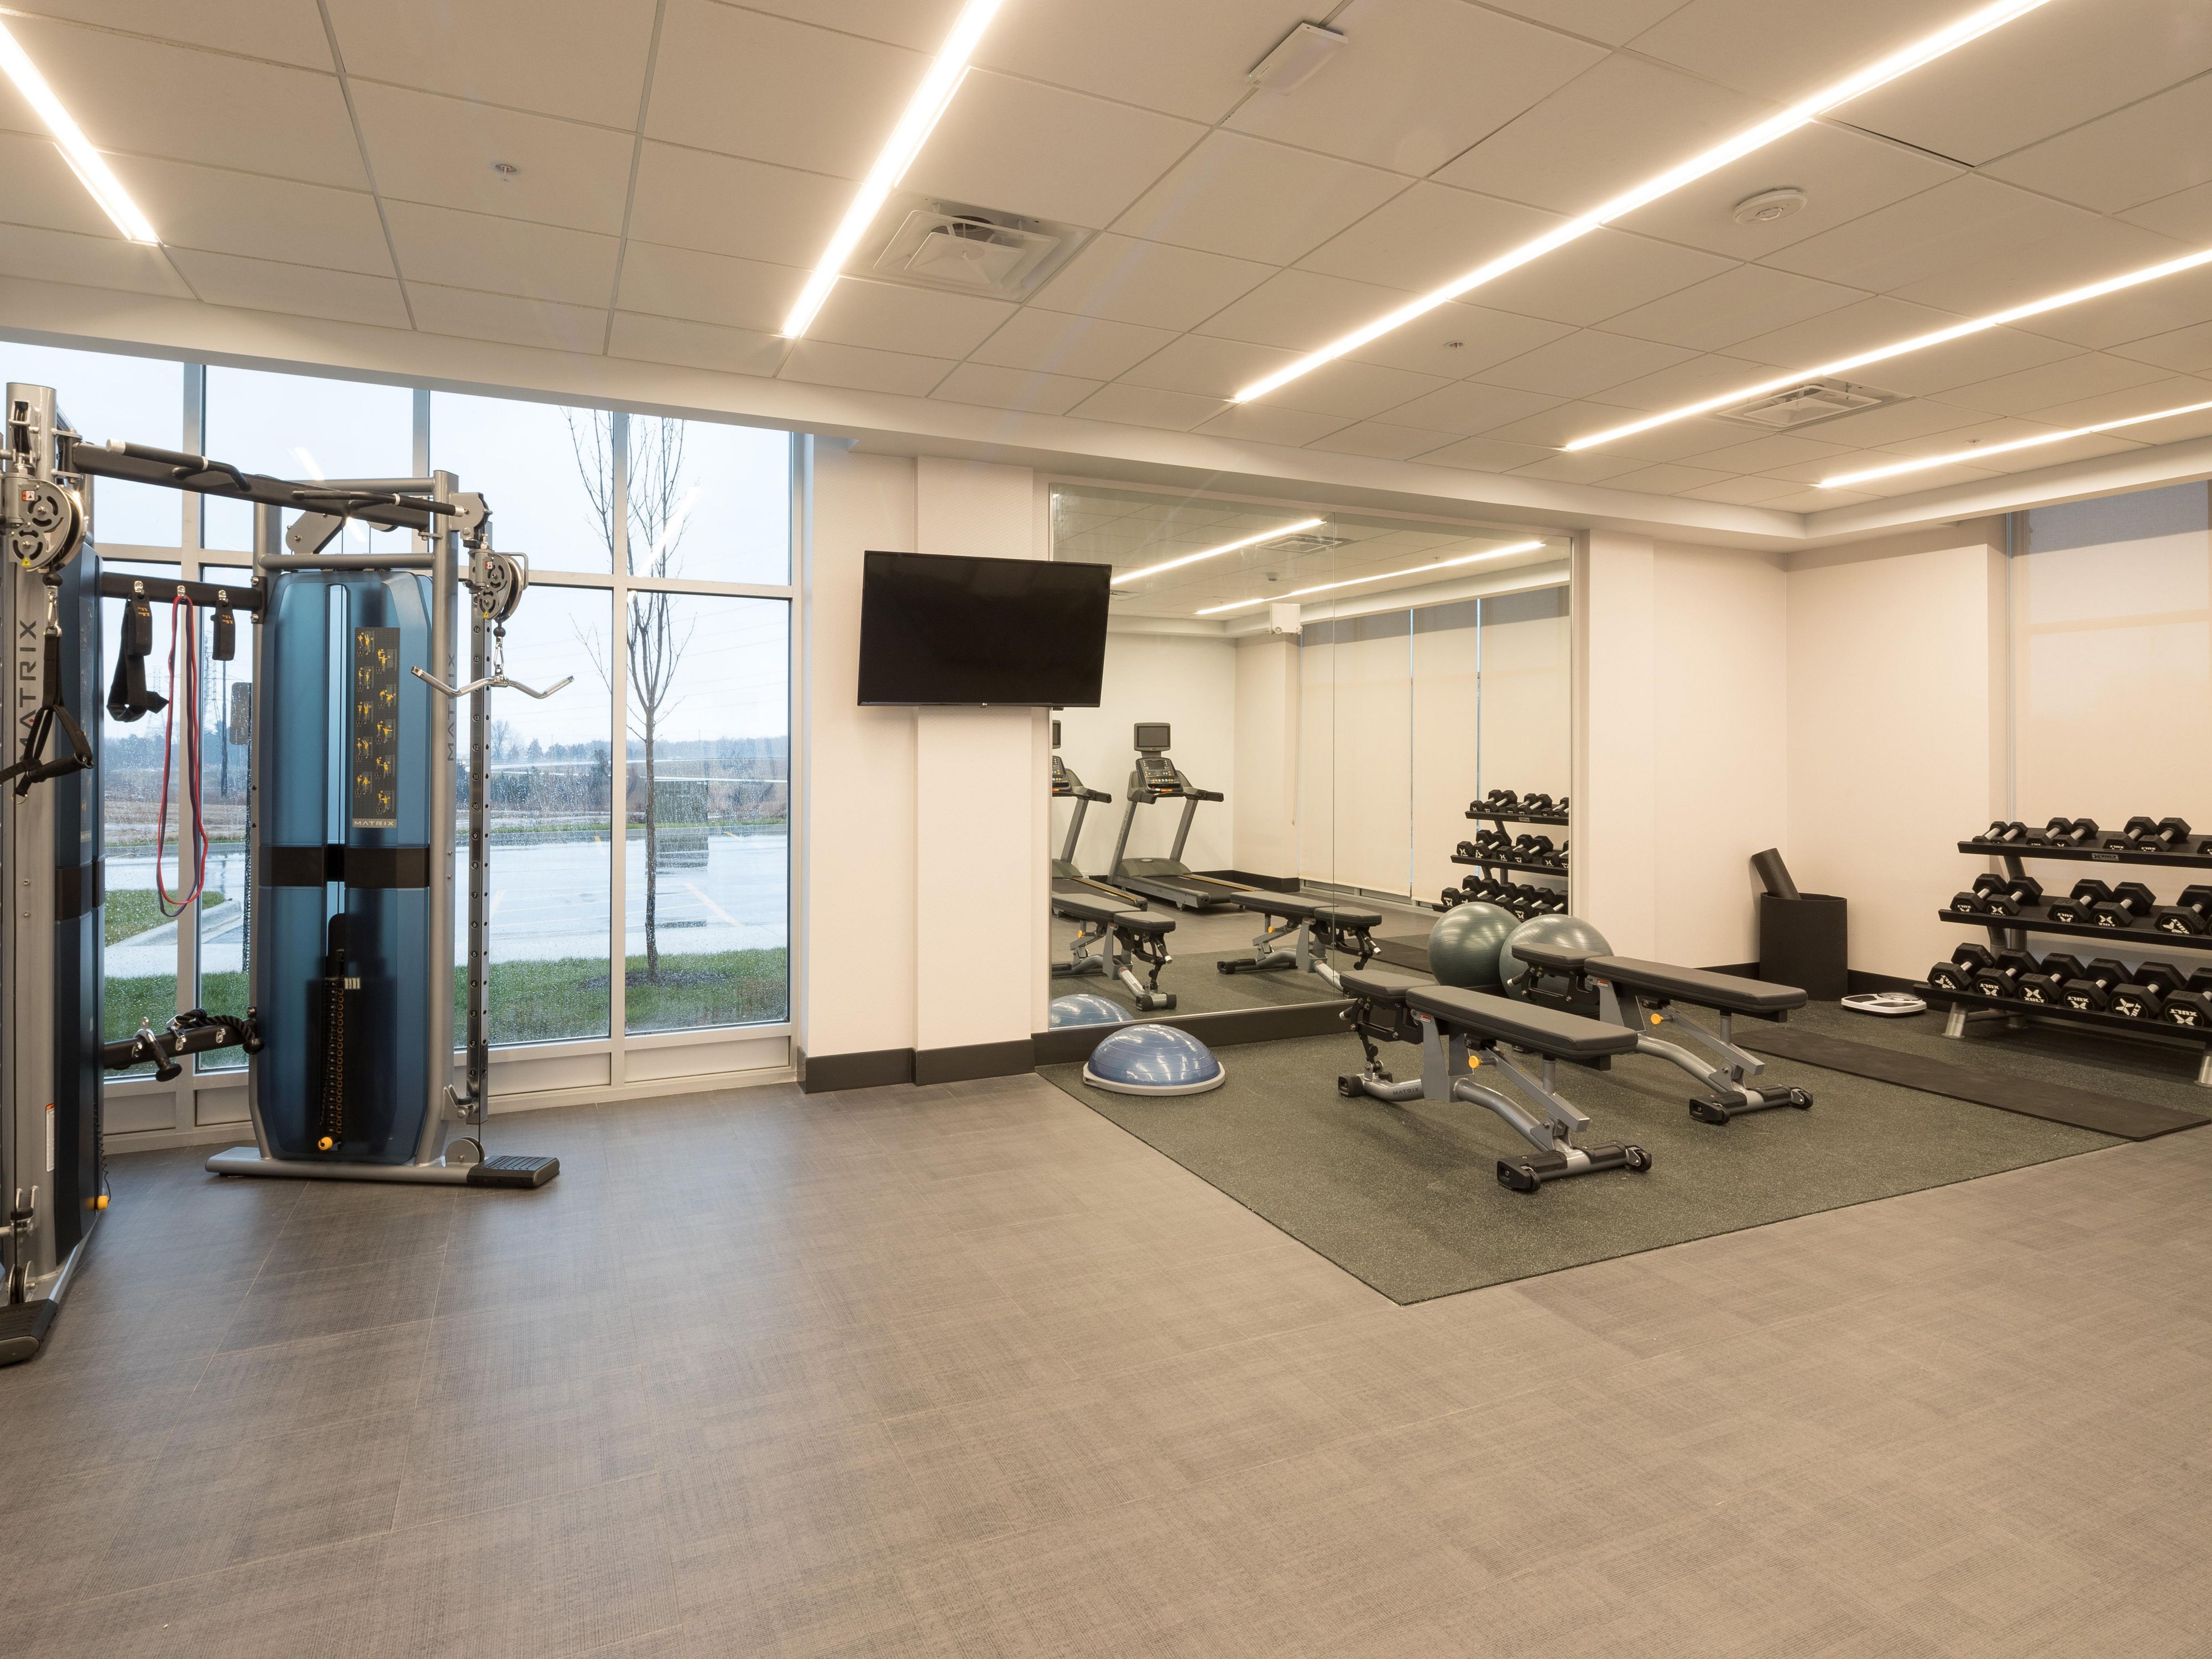 Push yourself in our 24-hour fitness center and stay fit during your trip. Go for a run on the treadmills. Build strength with the free weights. Enjoy a session on one of our elliptical machines. Our fitness center is stocked with fresh towels and a water station.